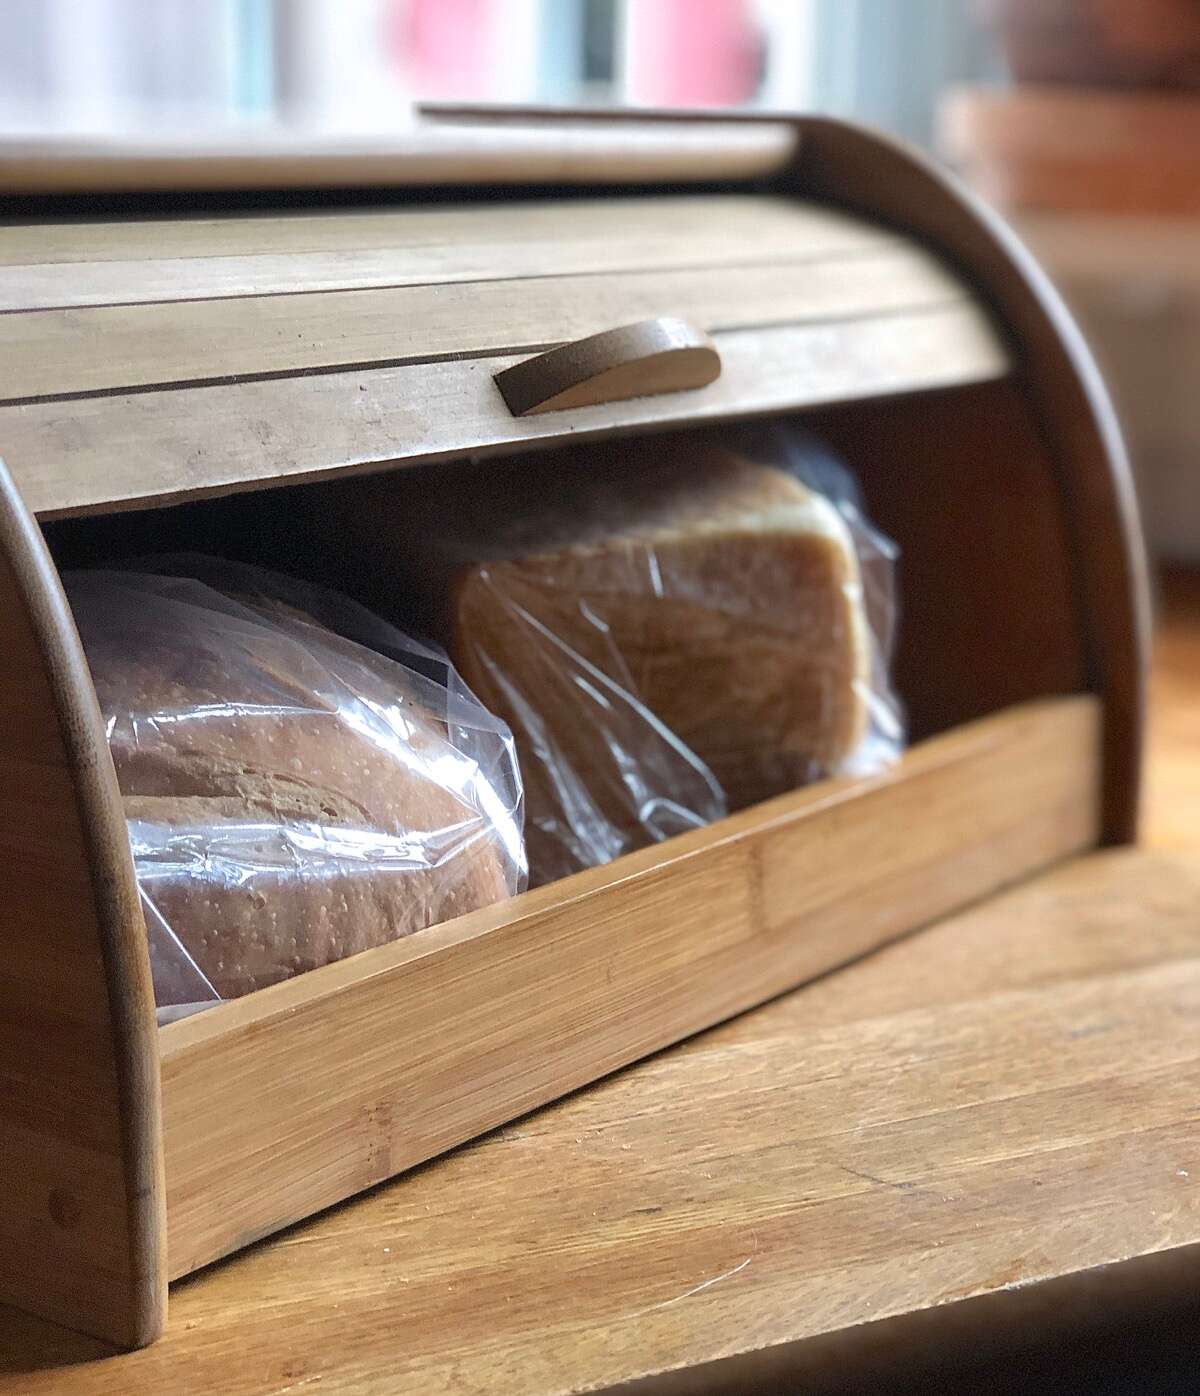 The best way to store bread is in a timber bread tin. The Shuuter door provides ventilation and the timber keeps the bread cool